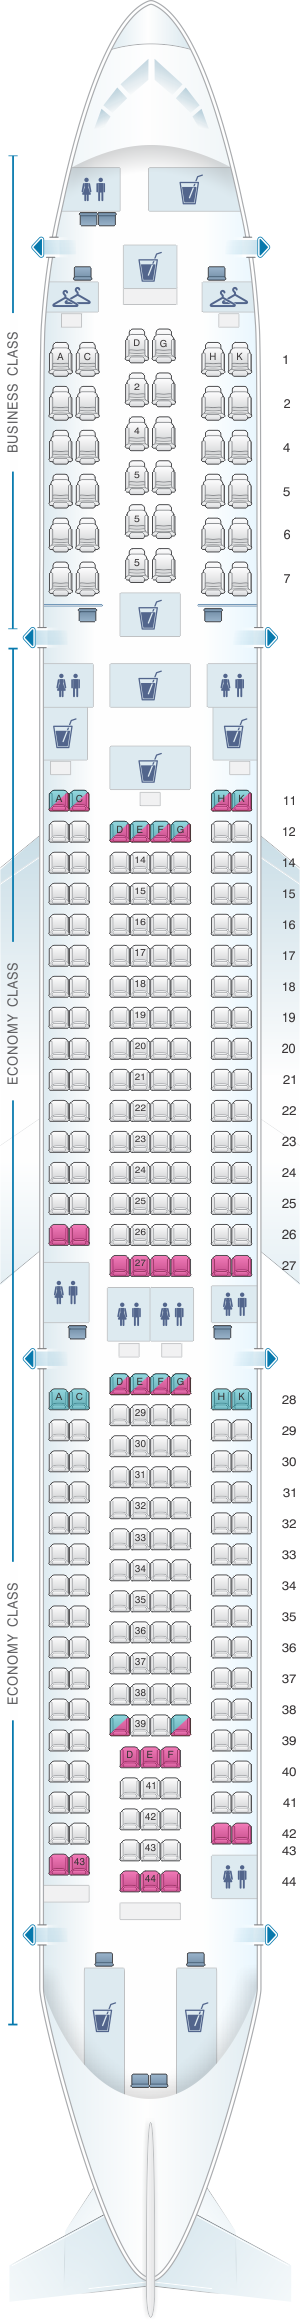 Seat map for Malaysia Airlines Airbus A330 300